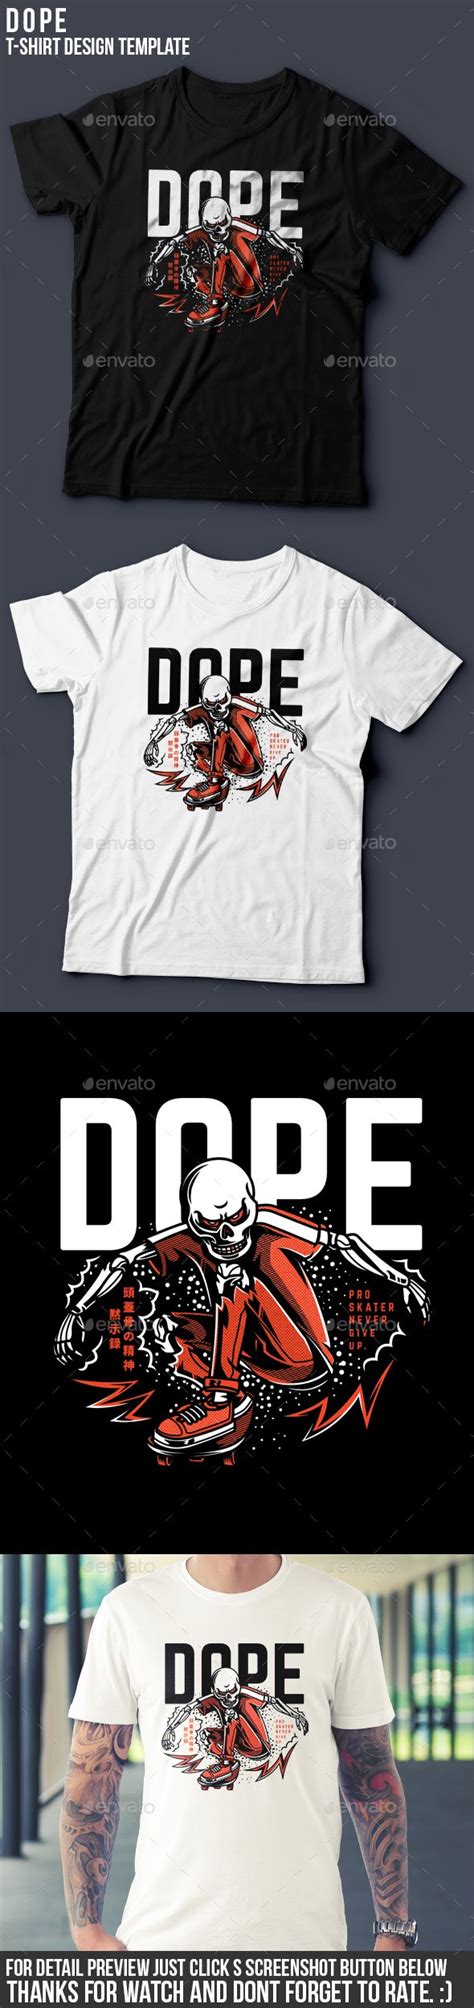 Dope T Shirt Design By Badsyxn Graphicriver